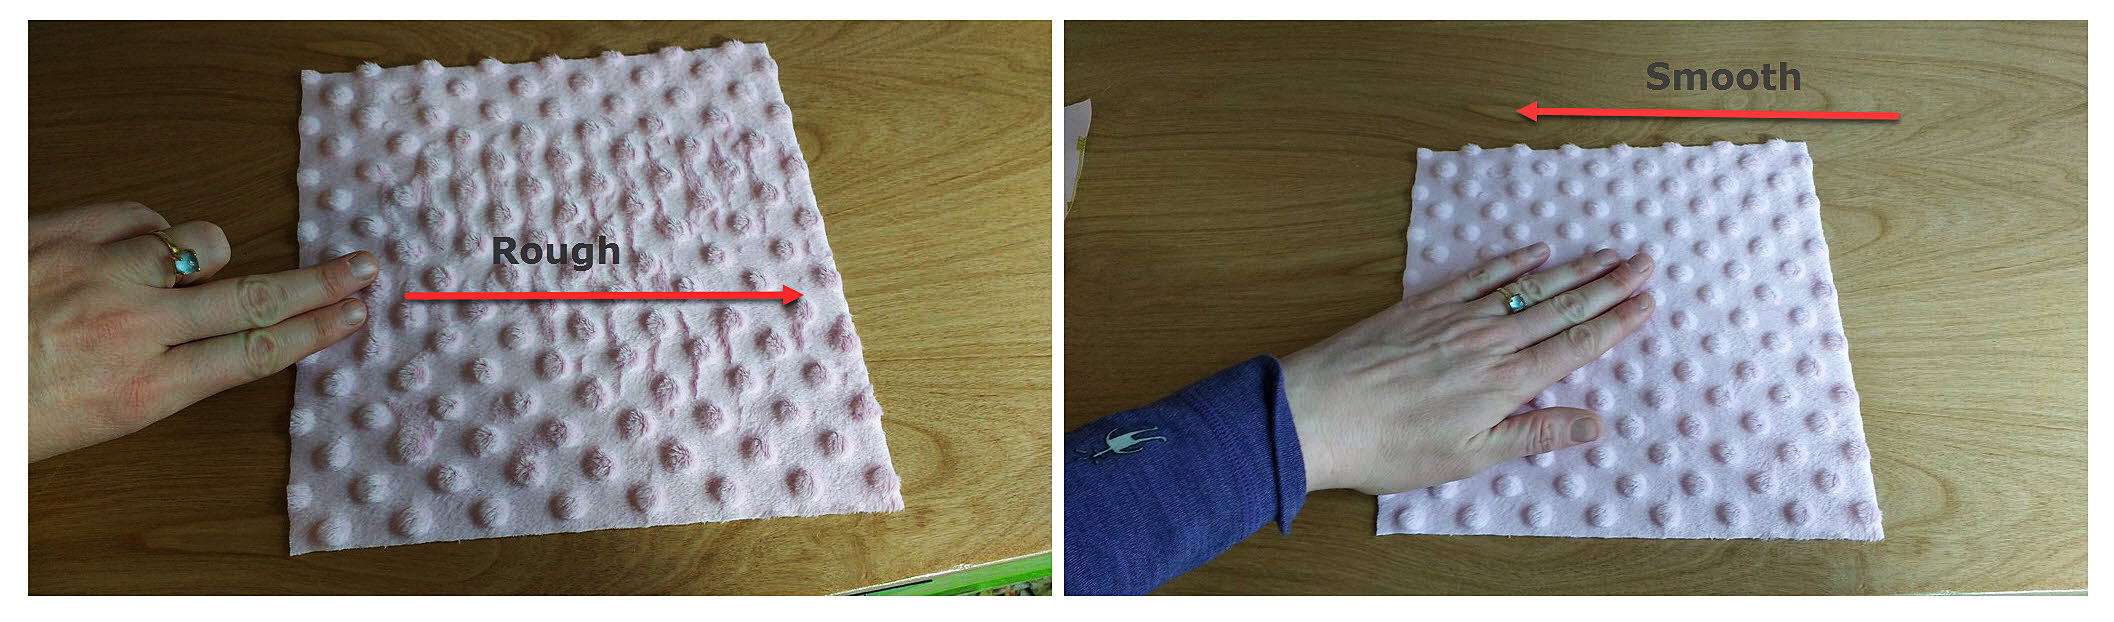 Sewing With Plush Fabric